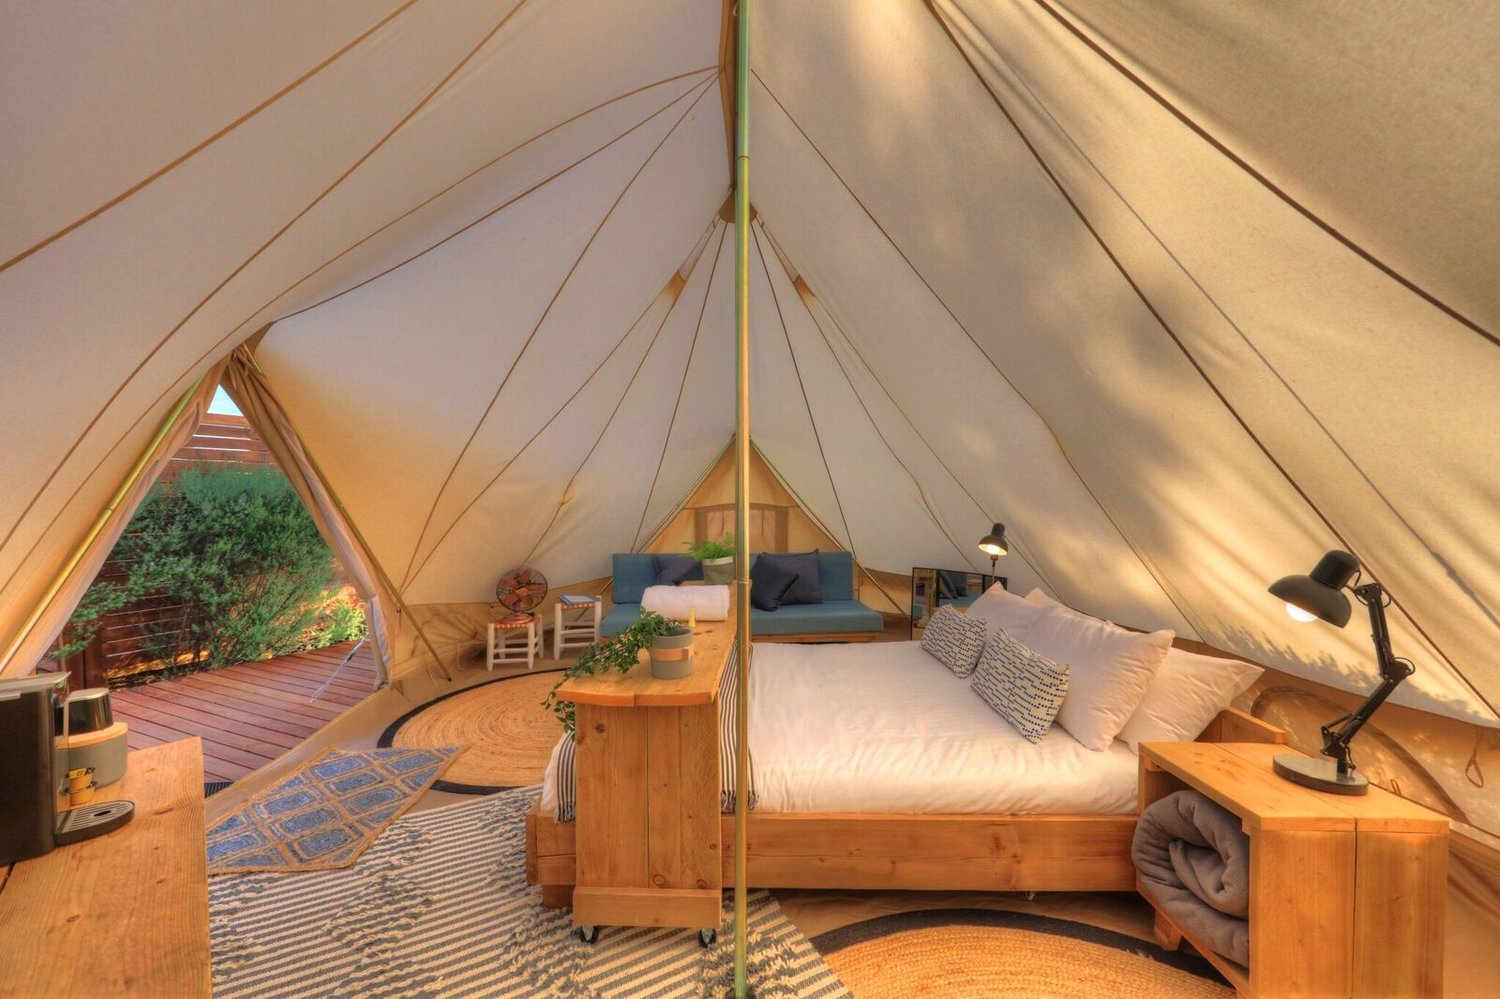 Shemale tent